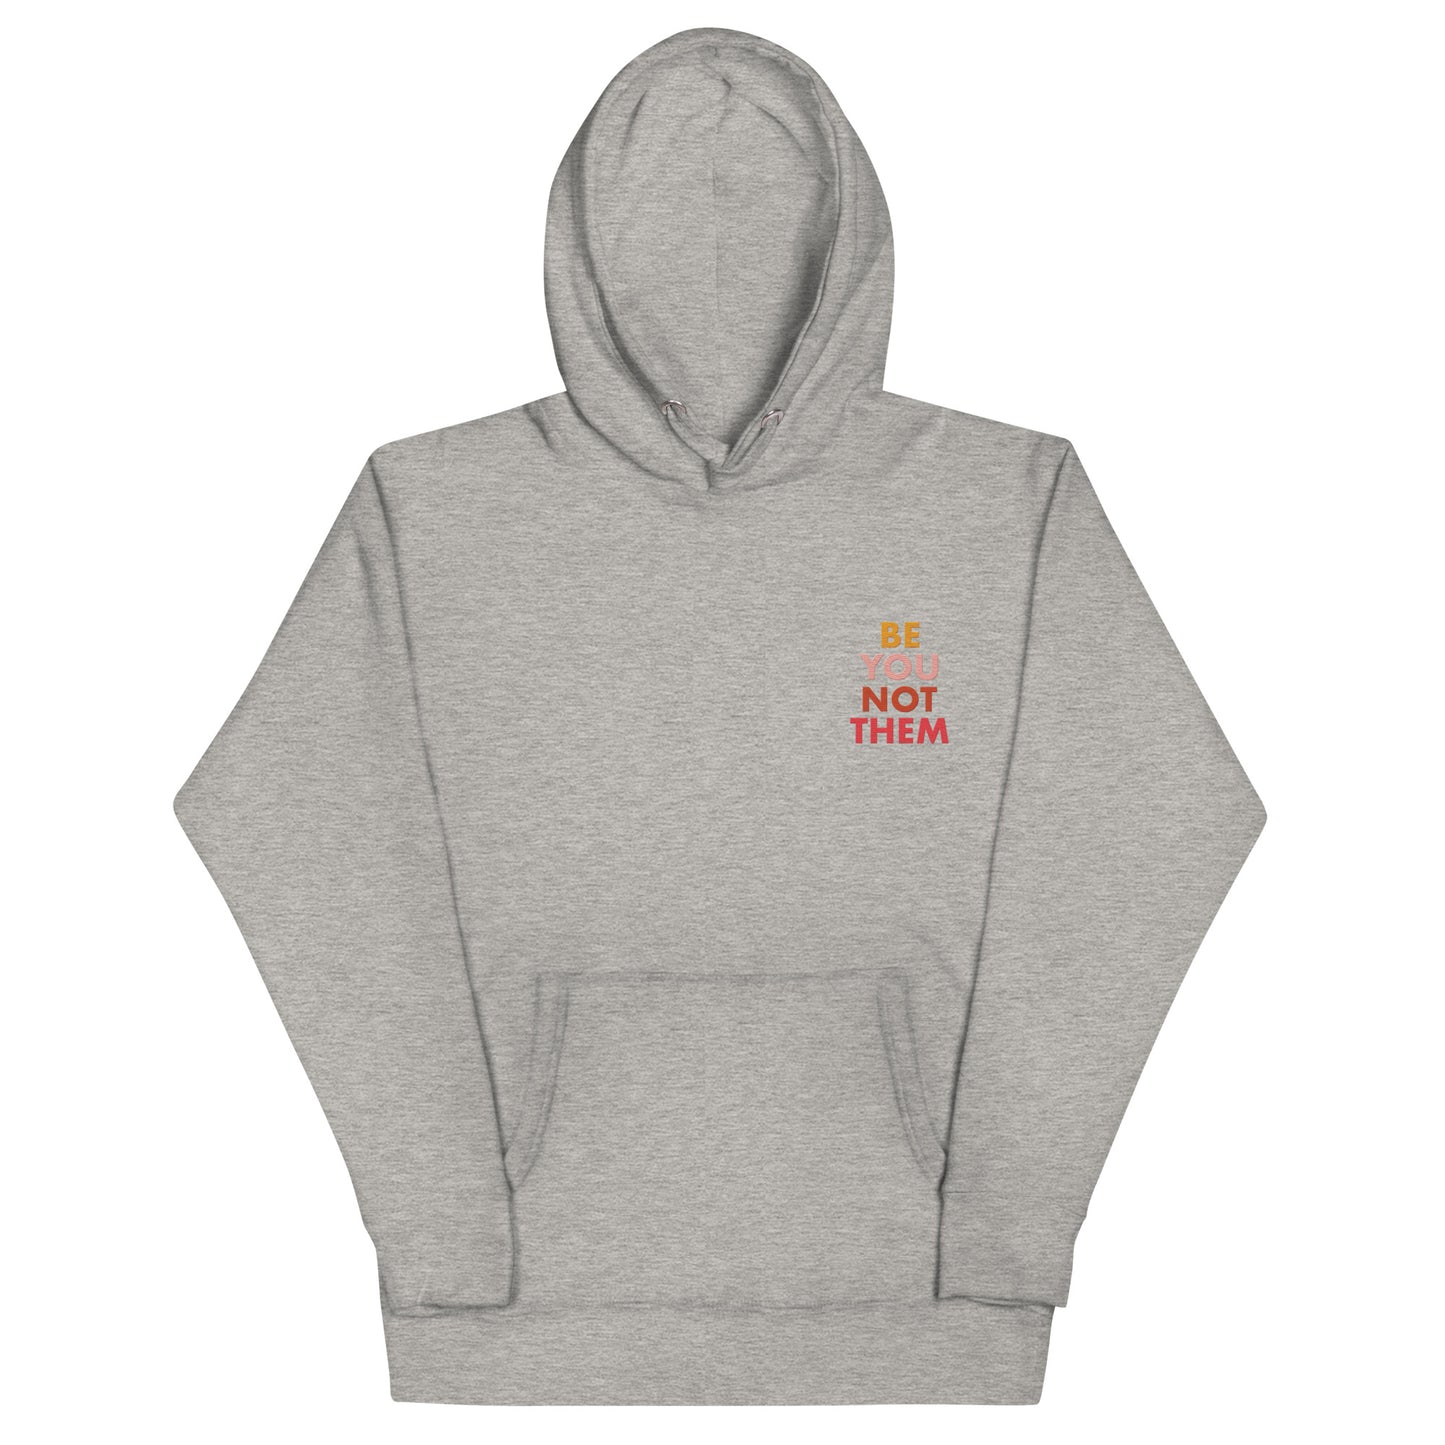 Hoodie Be You Not Them Embroidery